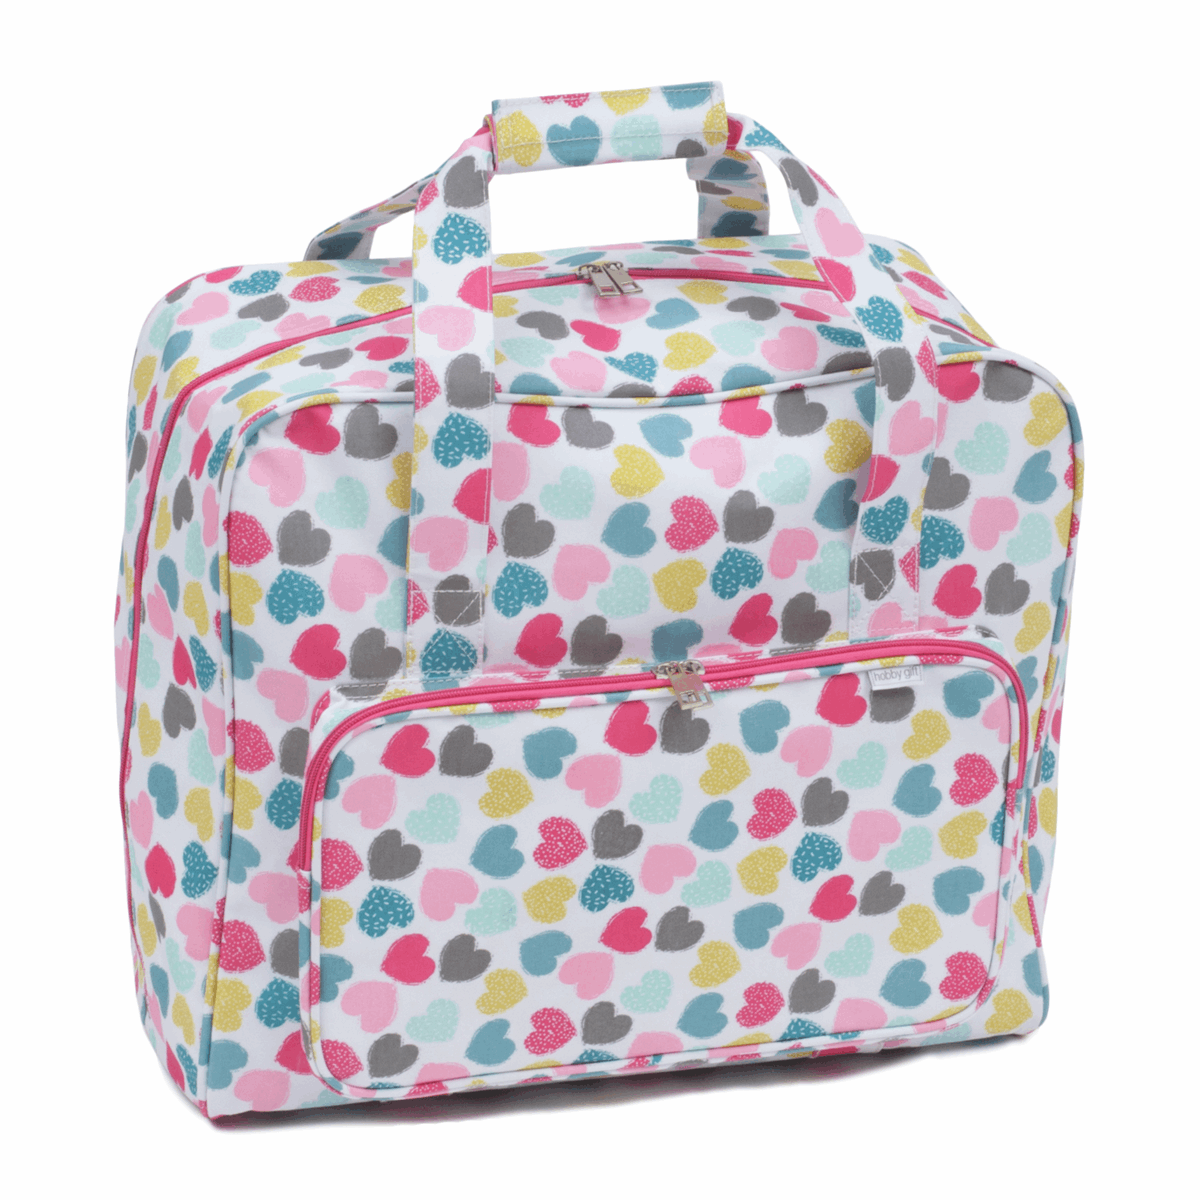 Love Sewing (Hearts) - Luxury Sewing Machine Bag with front pocket accessory storage